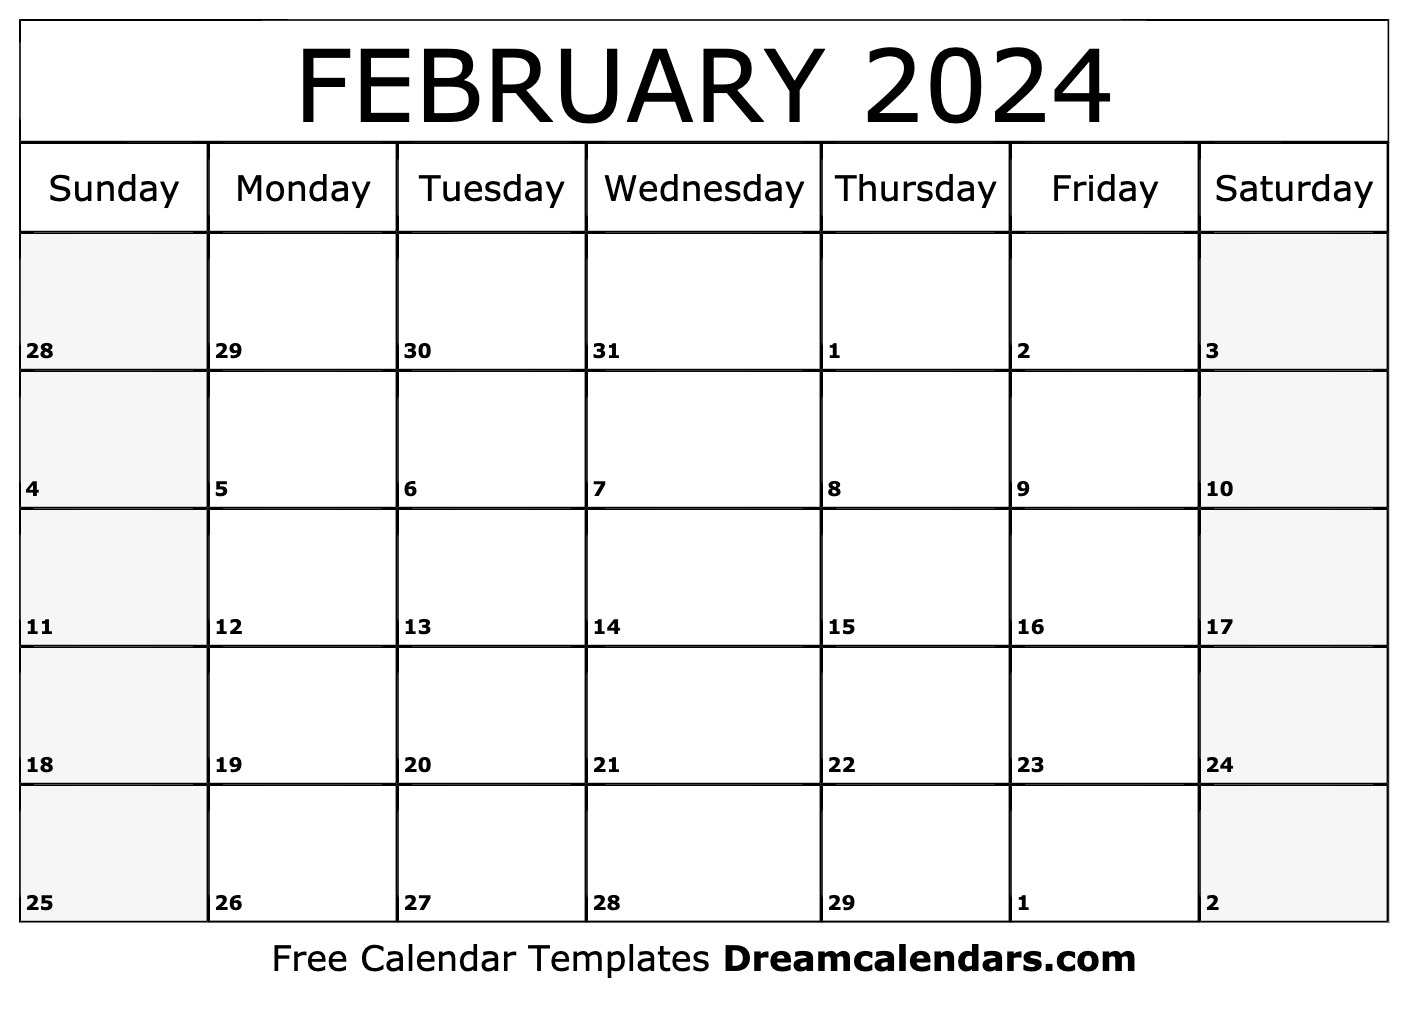 February Days This Year 2024 Cool Ultimate Popular List of Lunar